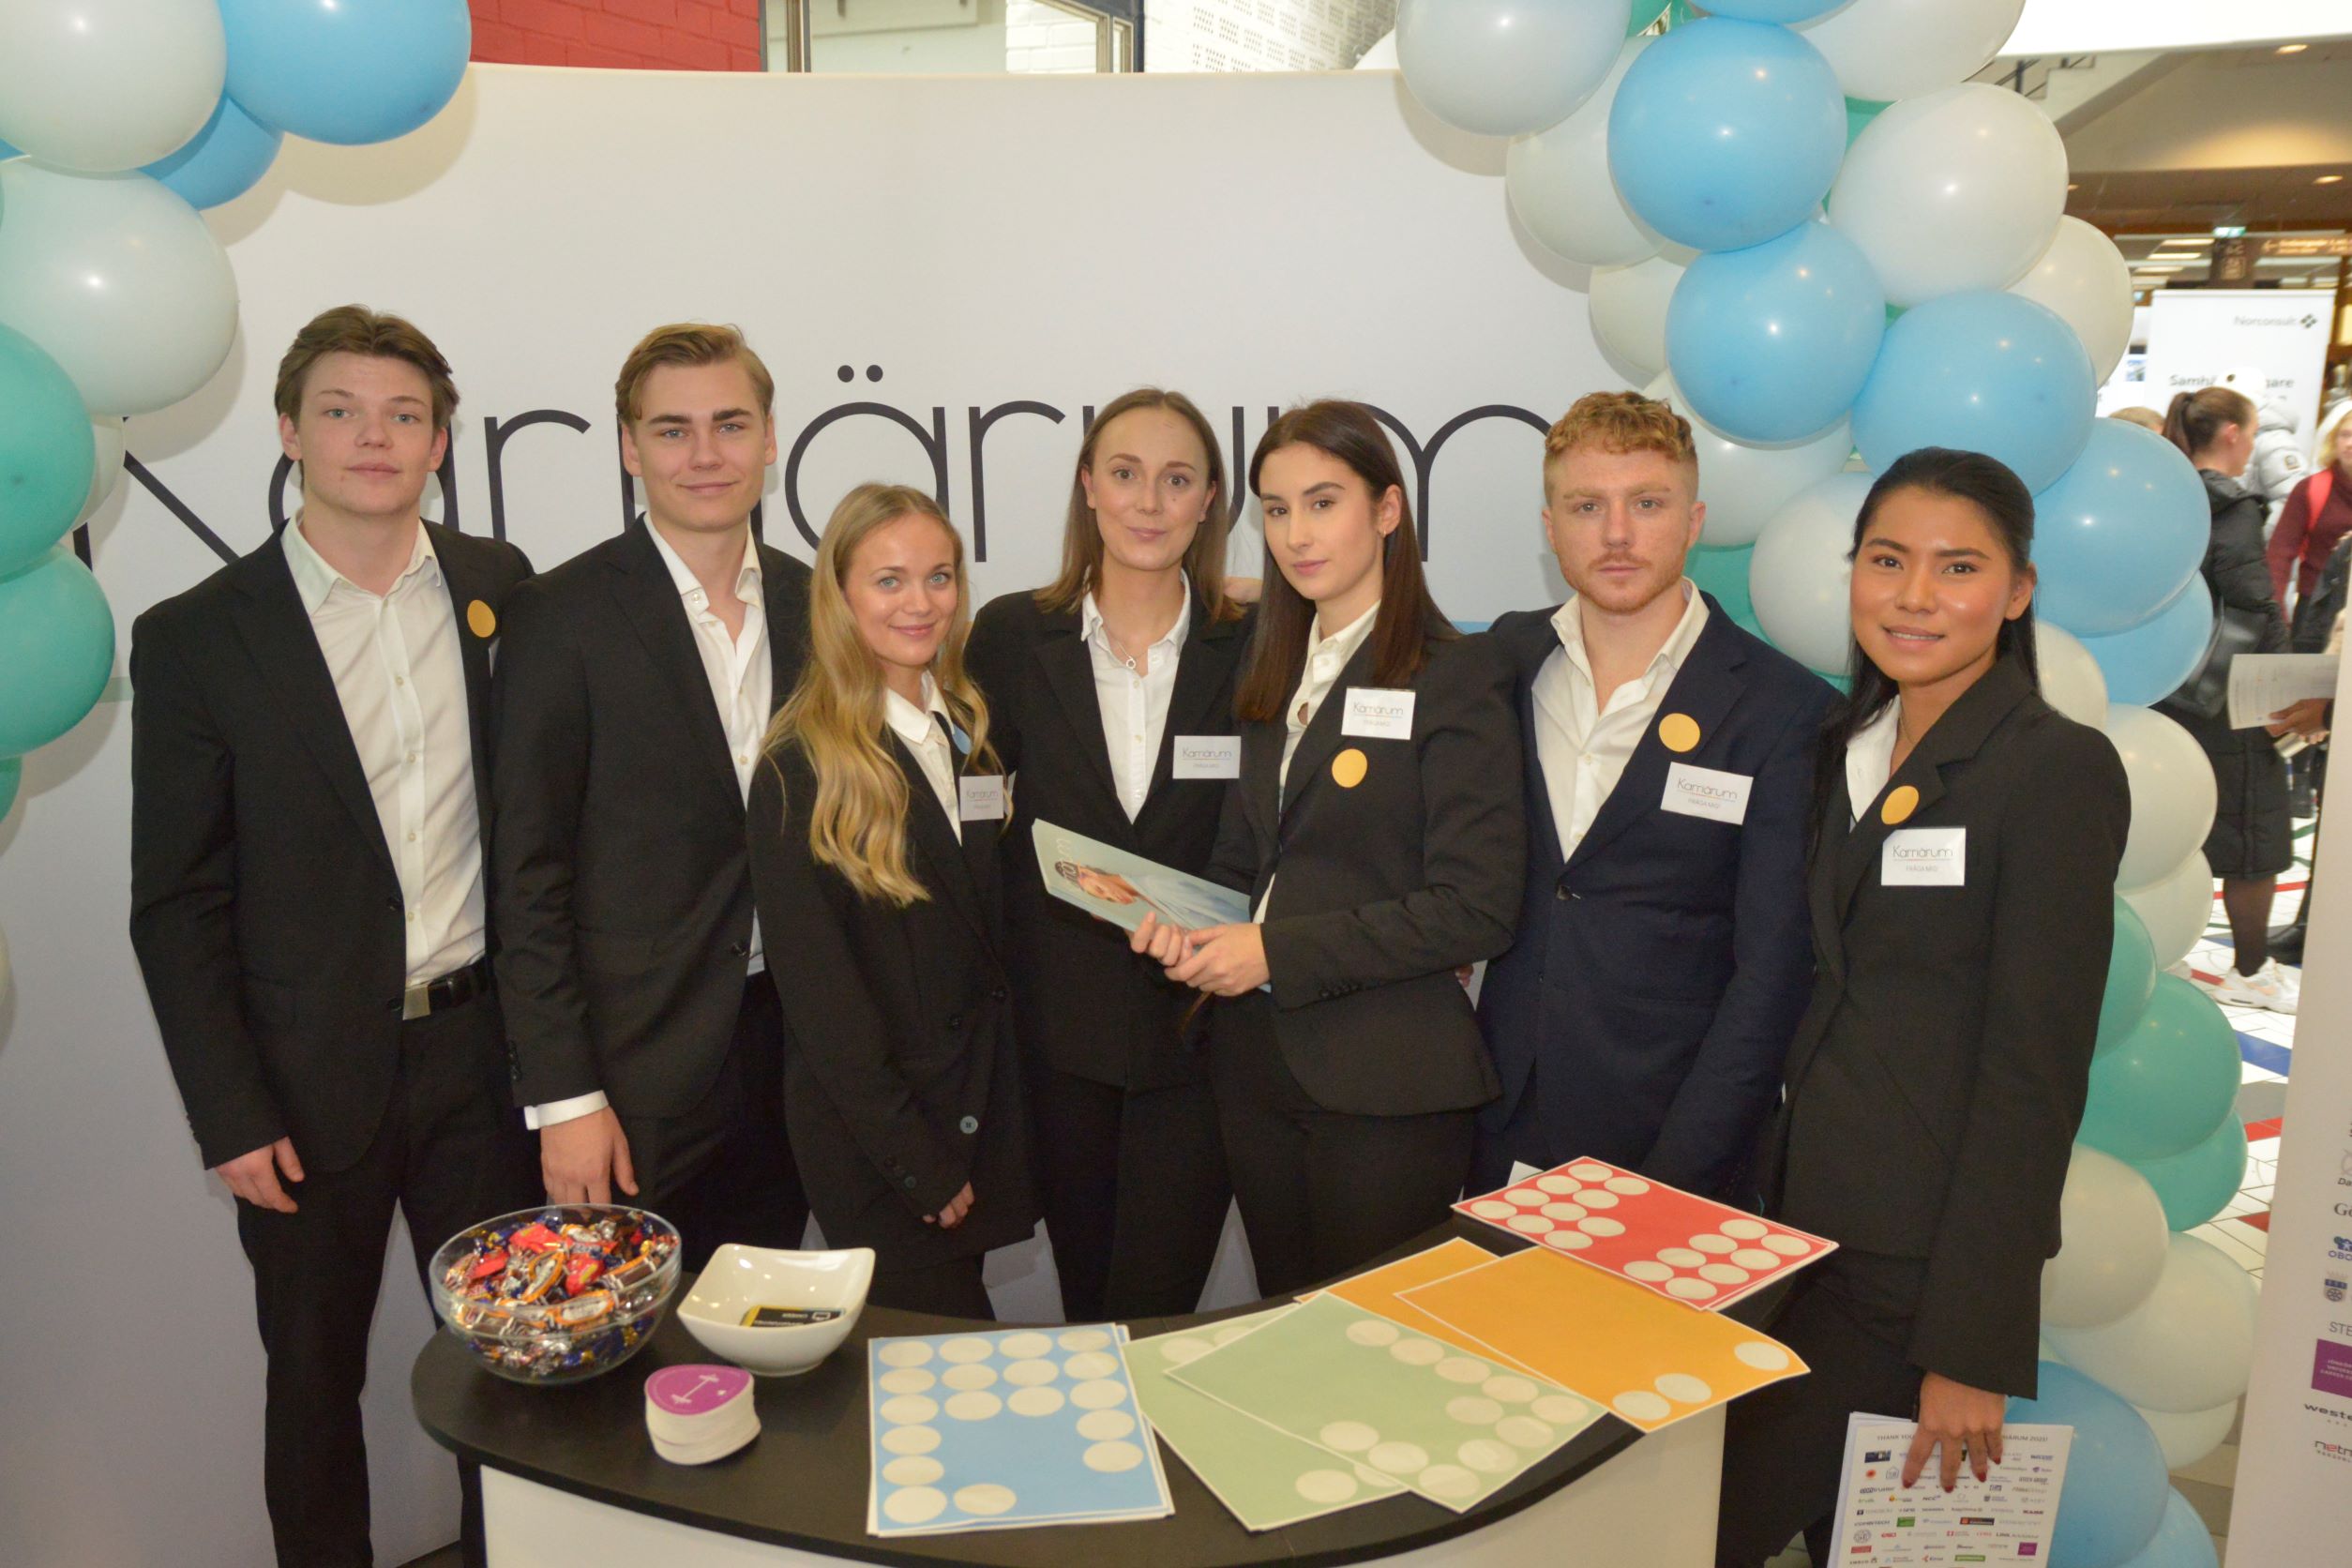 These JTH students assisted visitors to Karriärum with information.